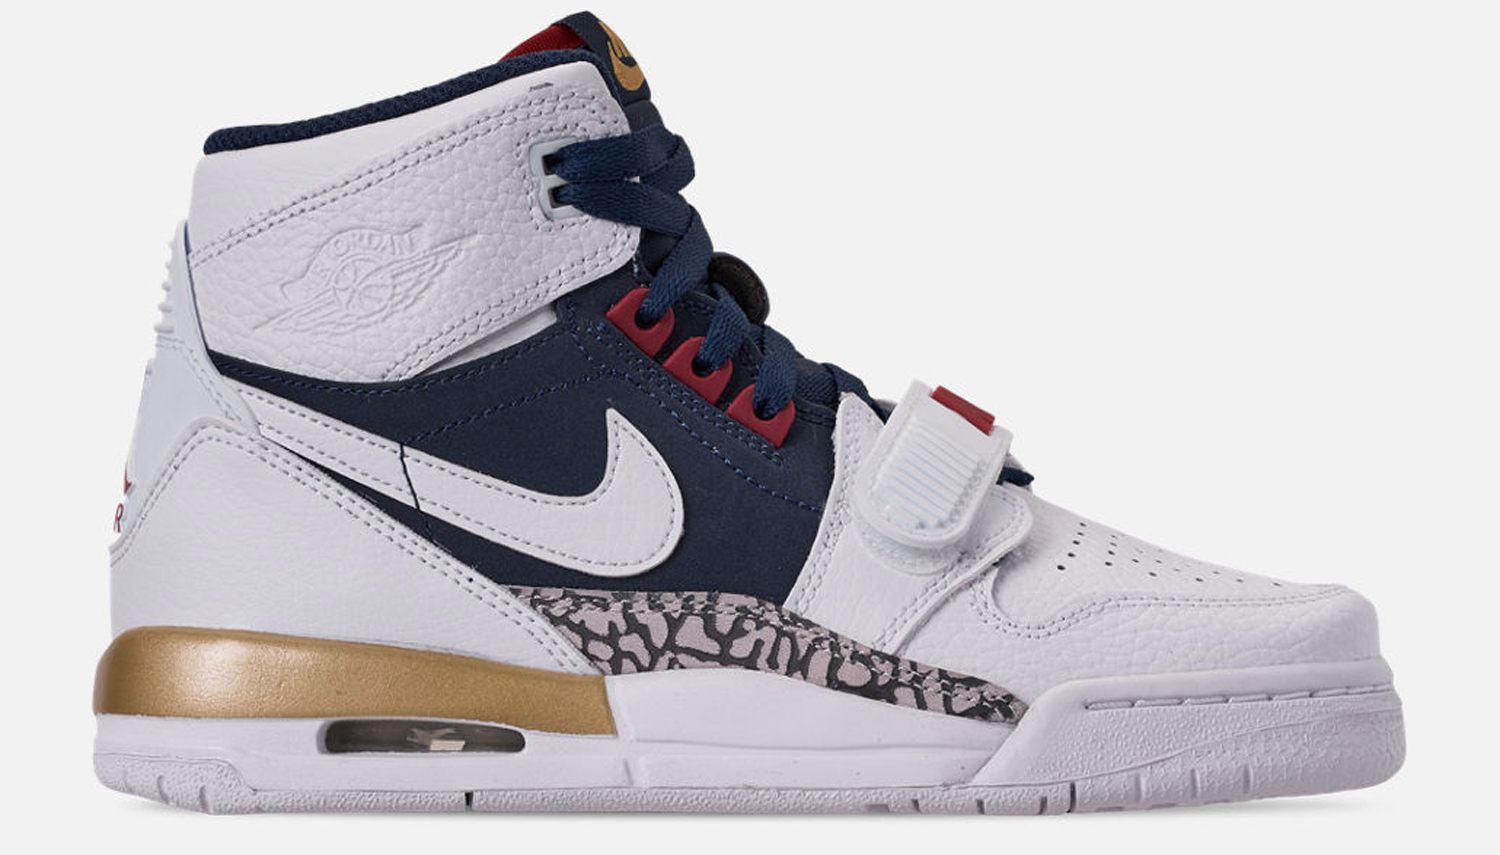 The Jordan Legacy 312 Released in a USA 